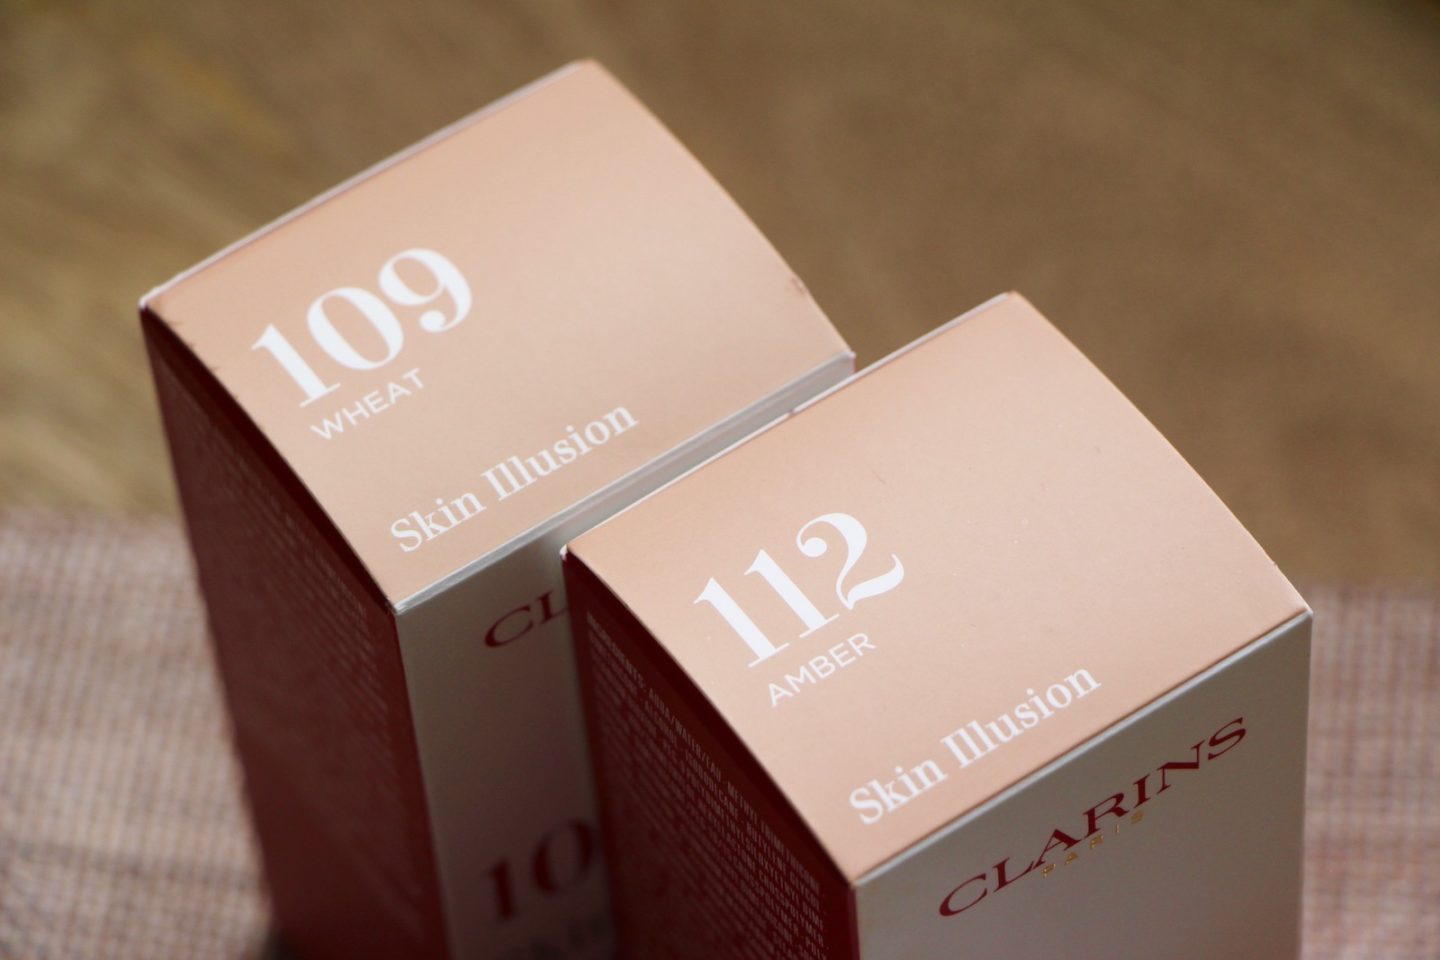 Clarins Skin Illusion foundation review